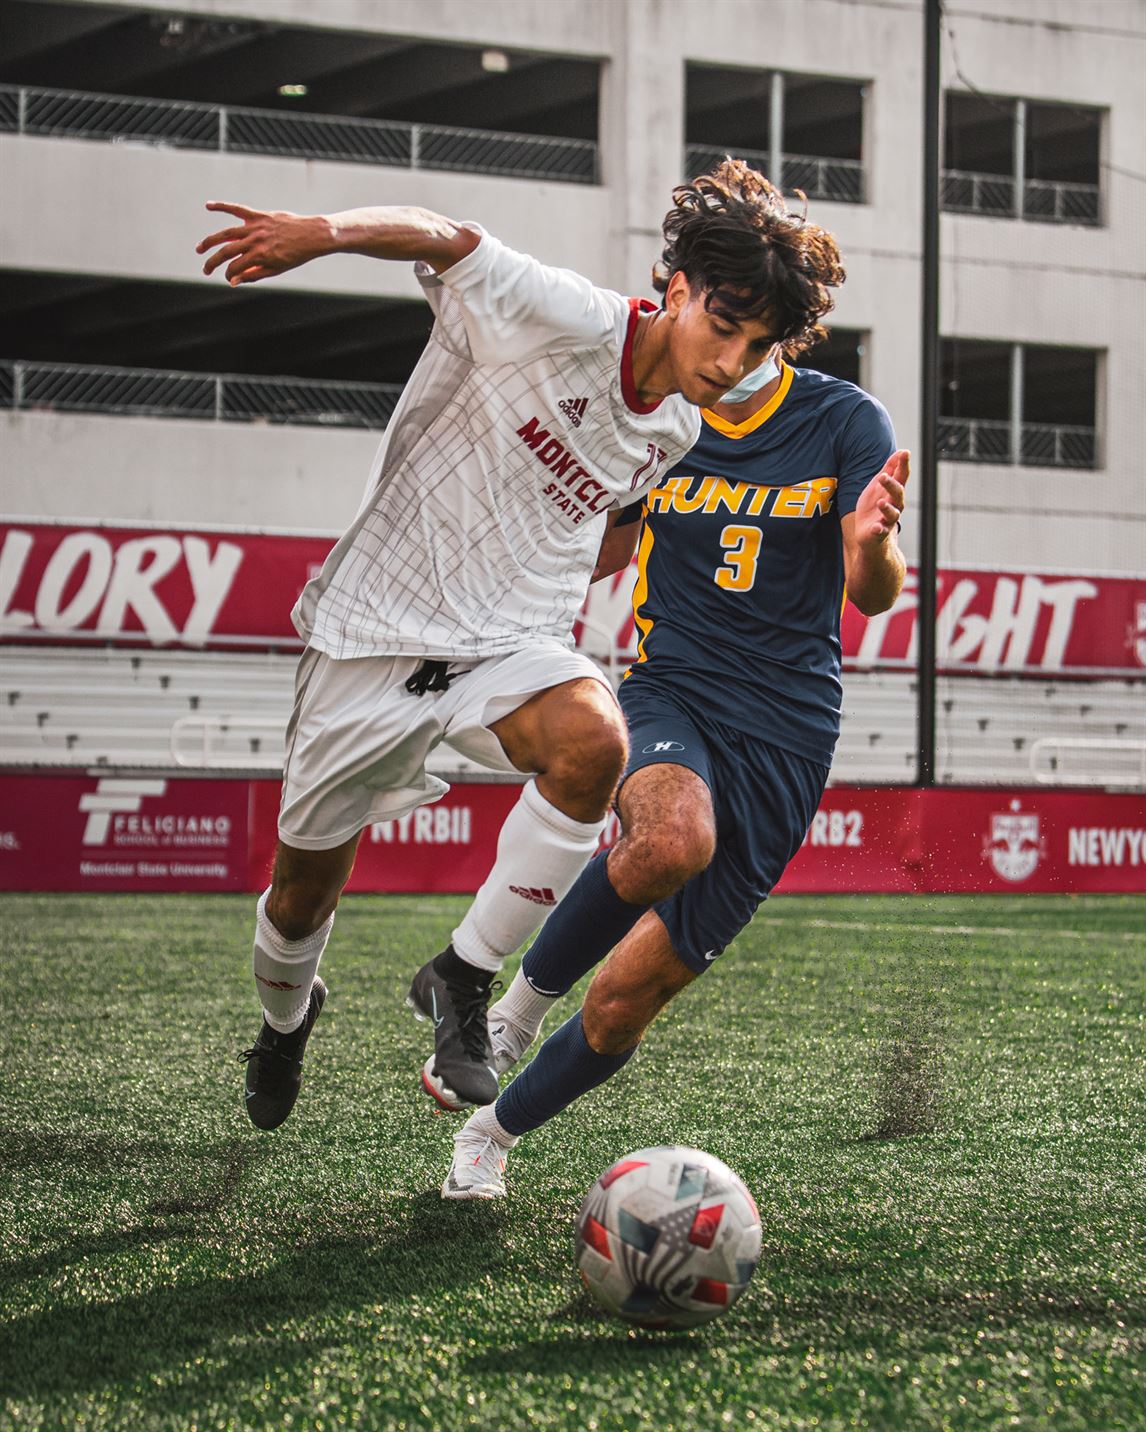 Sophomore forward Marvin Cadena fights for the ball during a Sept. 8 contest against Hunter College. Kevin Murrugarra | The Montclarion